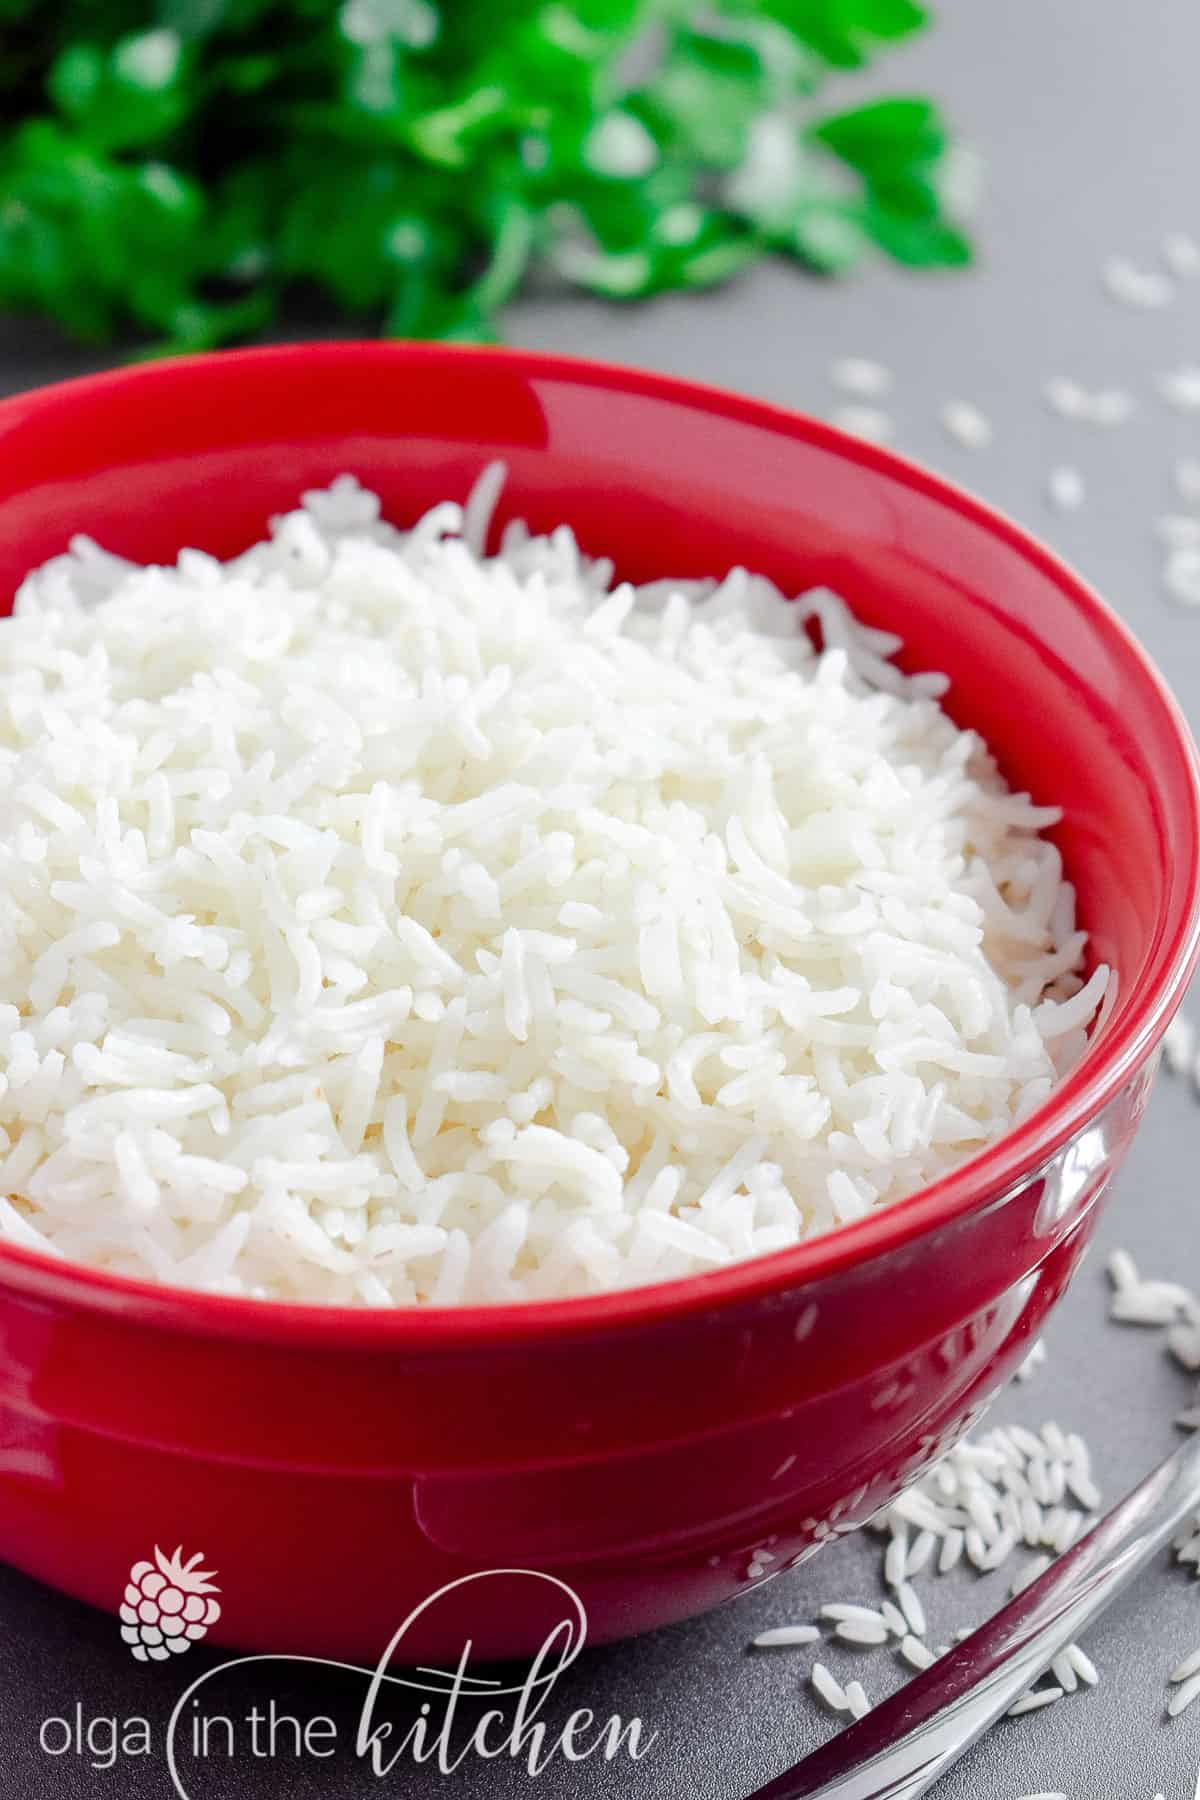 Learn how to cook perfect rice every time. This is our go-to simple, but reliable stove-top method of How to Cook White Rice to achieve perfectly tender and fluffy texture every time. #howtocookrice #whiterice #longgrainrice #basmatirice #jasminerice #olgainthekitchen #rice #sidedish #howto